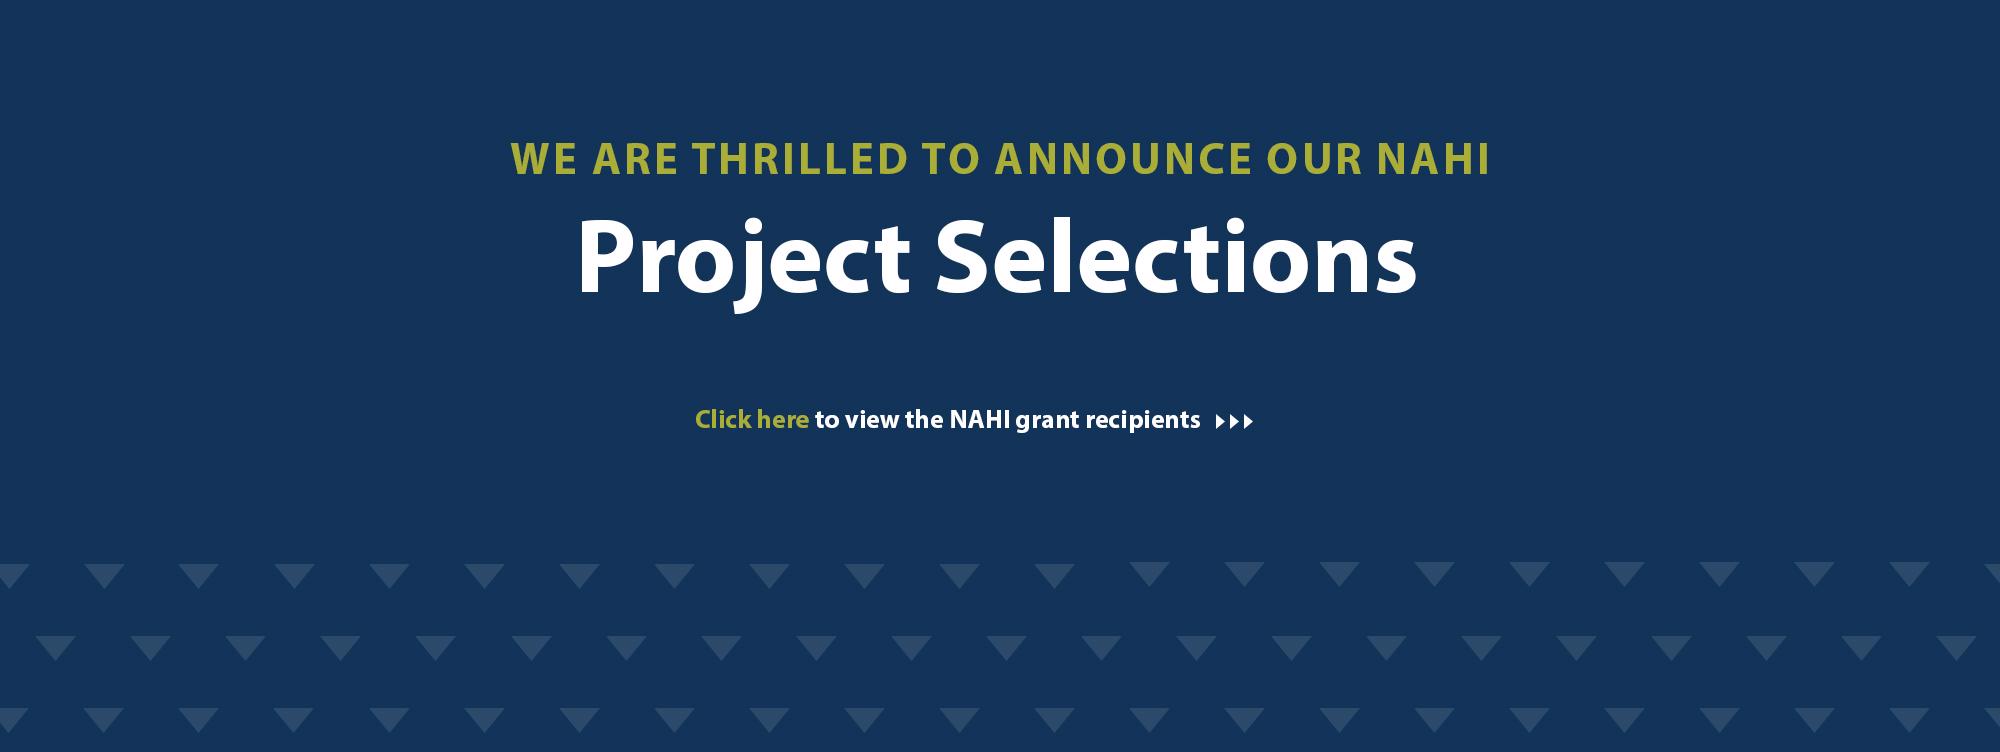 we are thrilled to announce our NAHI project selections. Click here to view the NAHI grant recipients. 